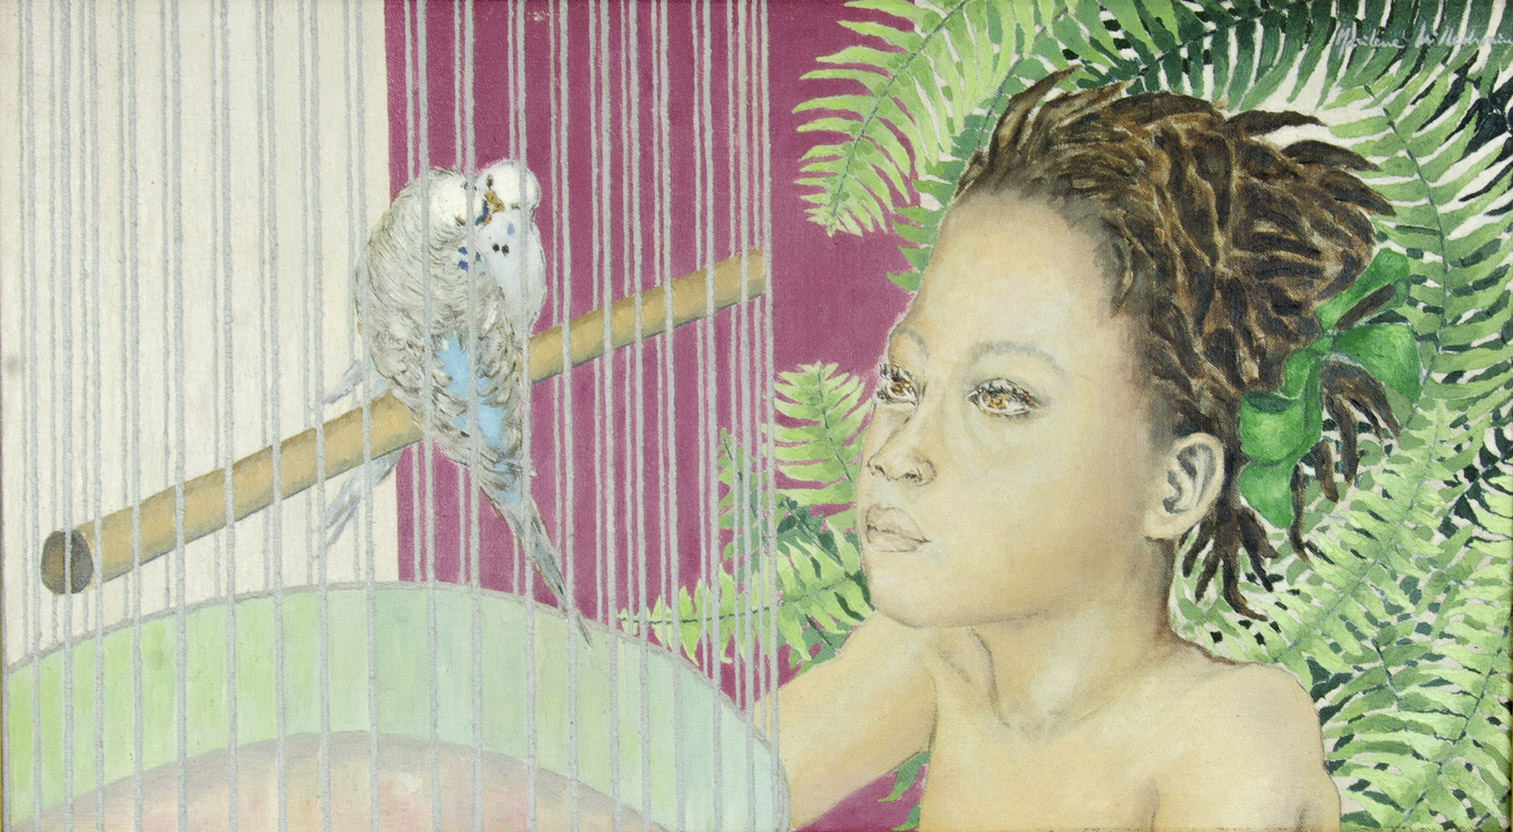 A Bird in a Cage and a Young Girl's Gaze